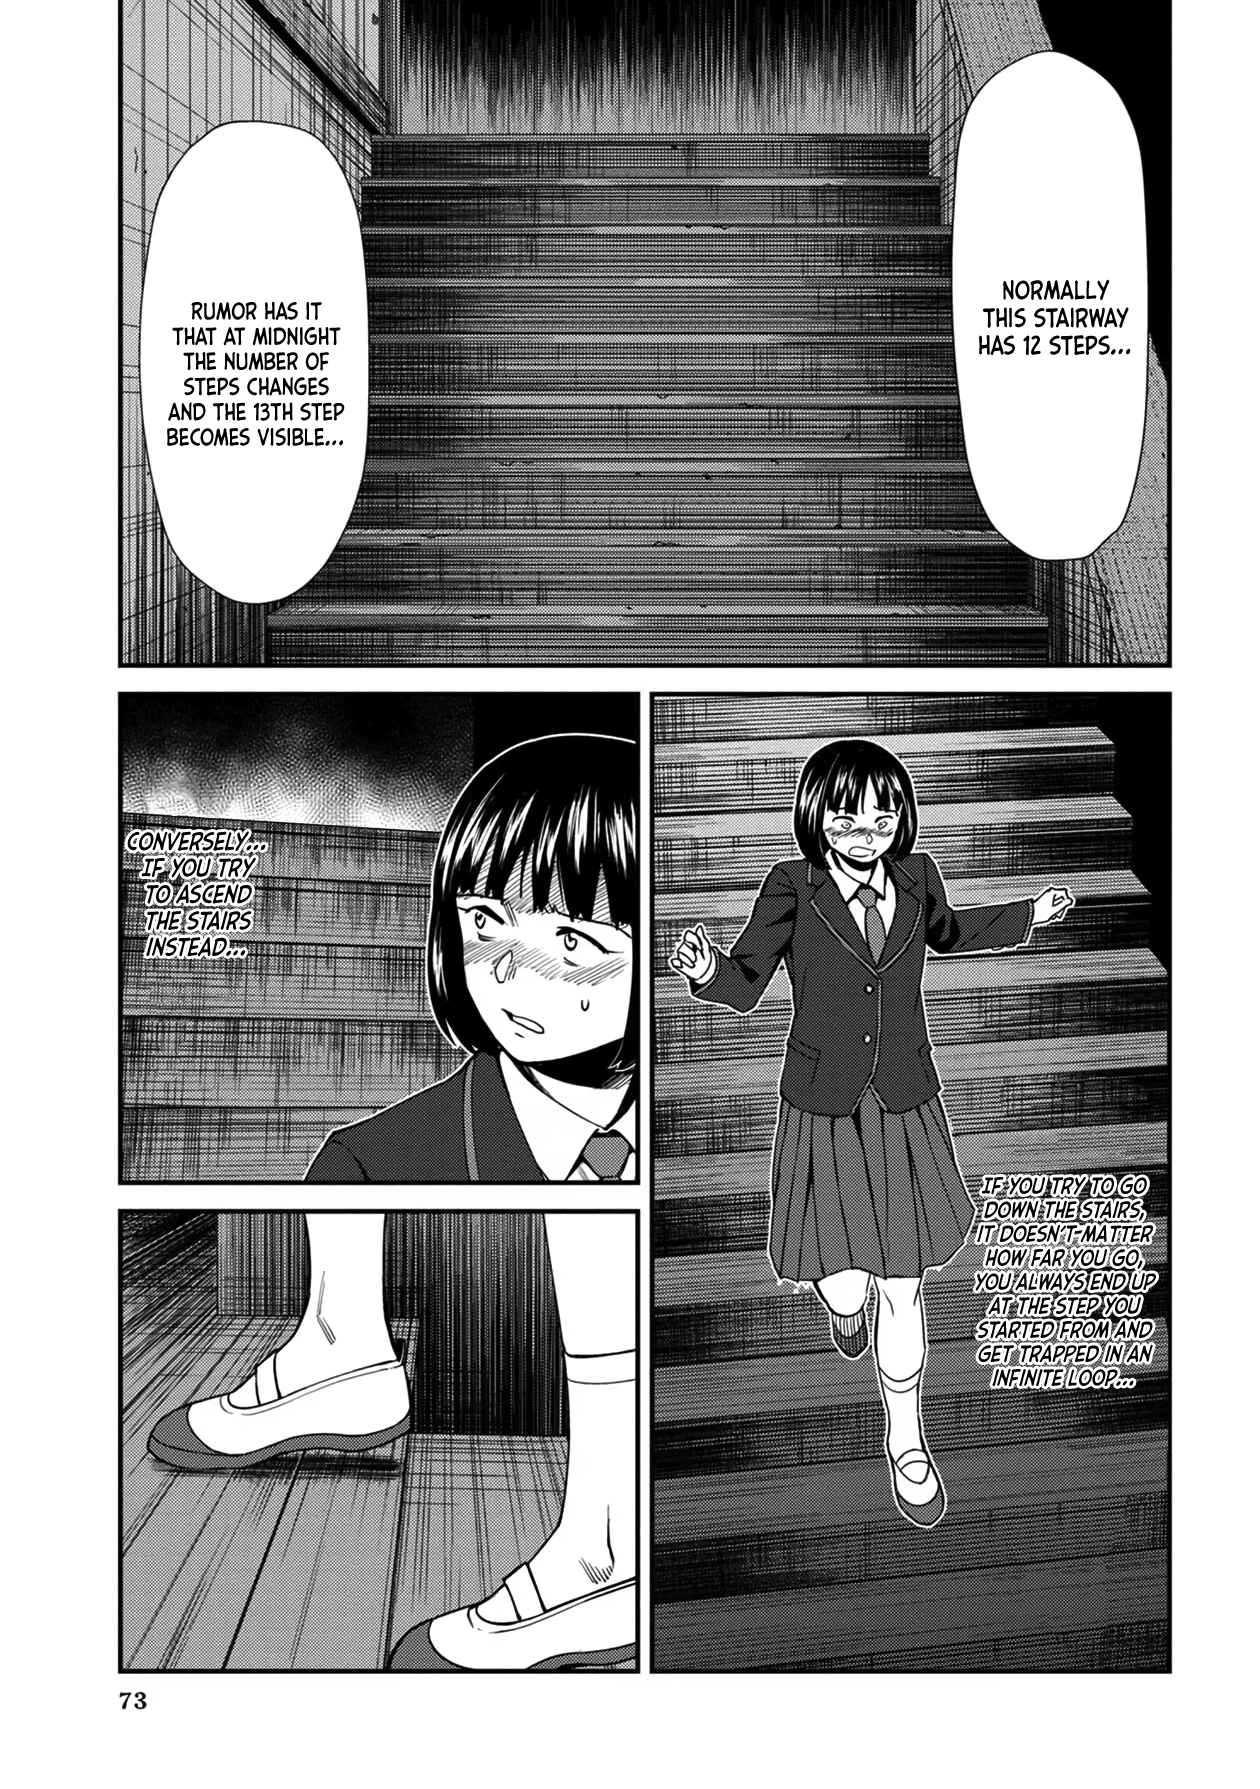 Bad Girl-Exorcist Reina Vol.4 Chapter 35: Exorcism #35 - The School's Seven Mysteries (4) - Picture 3